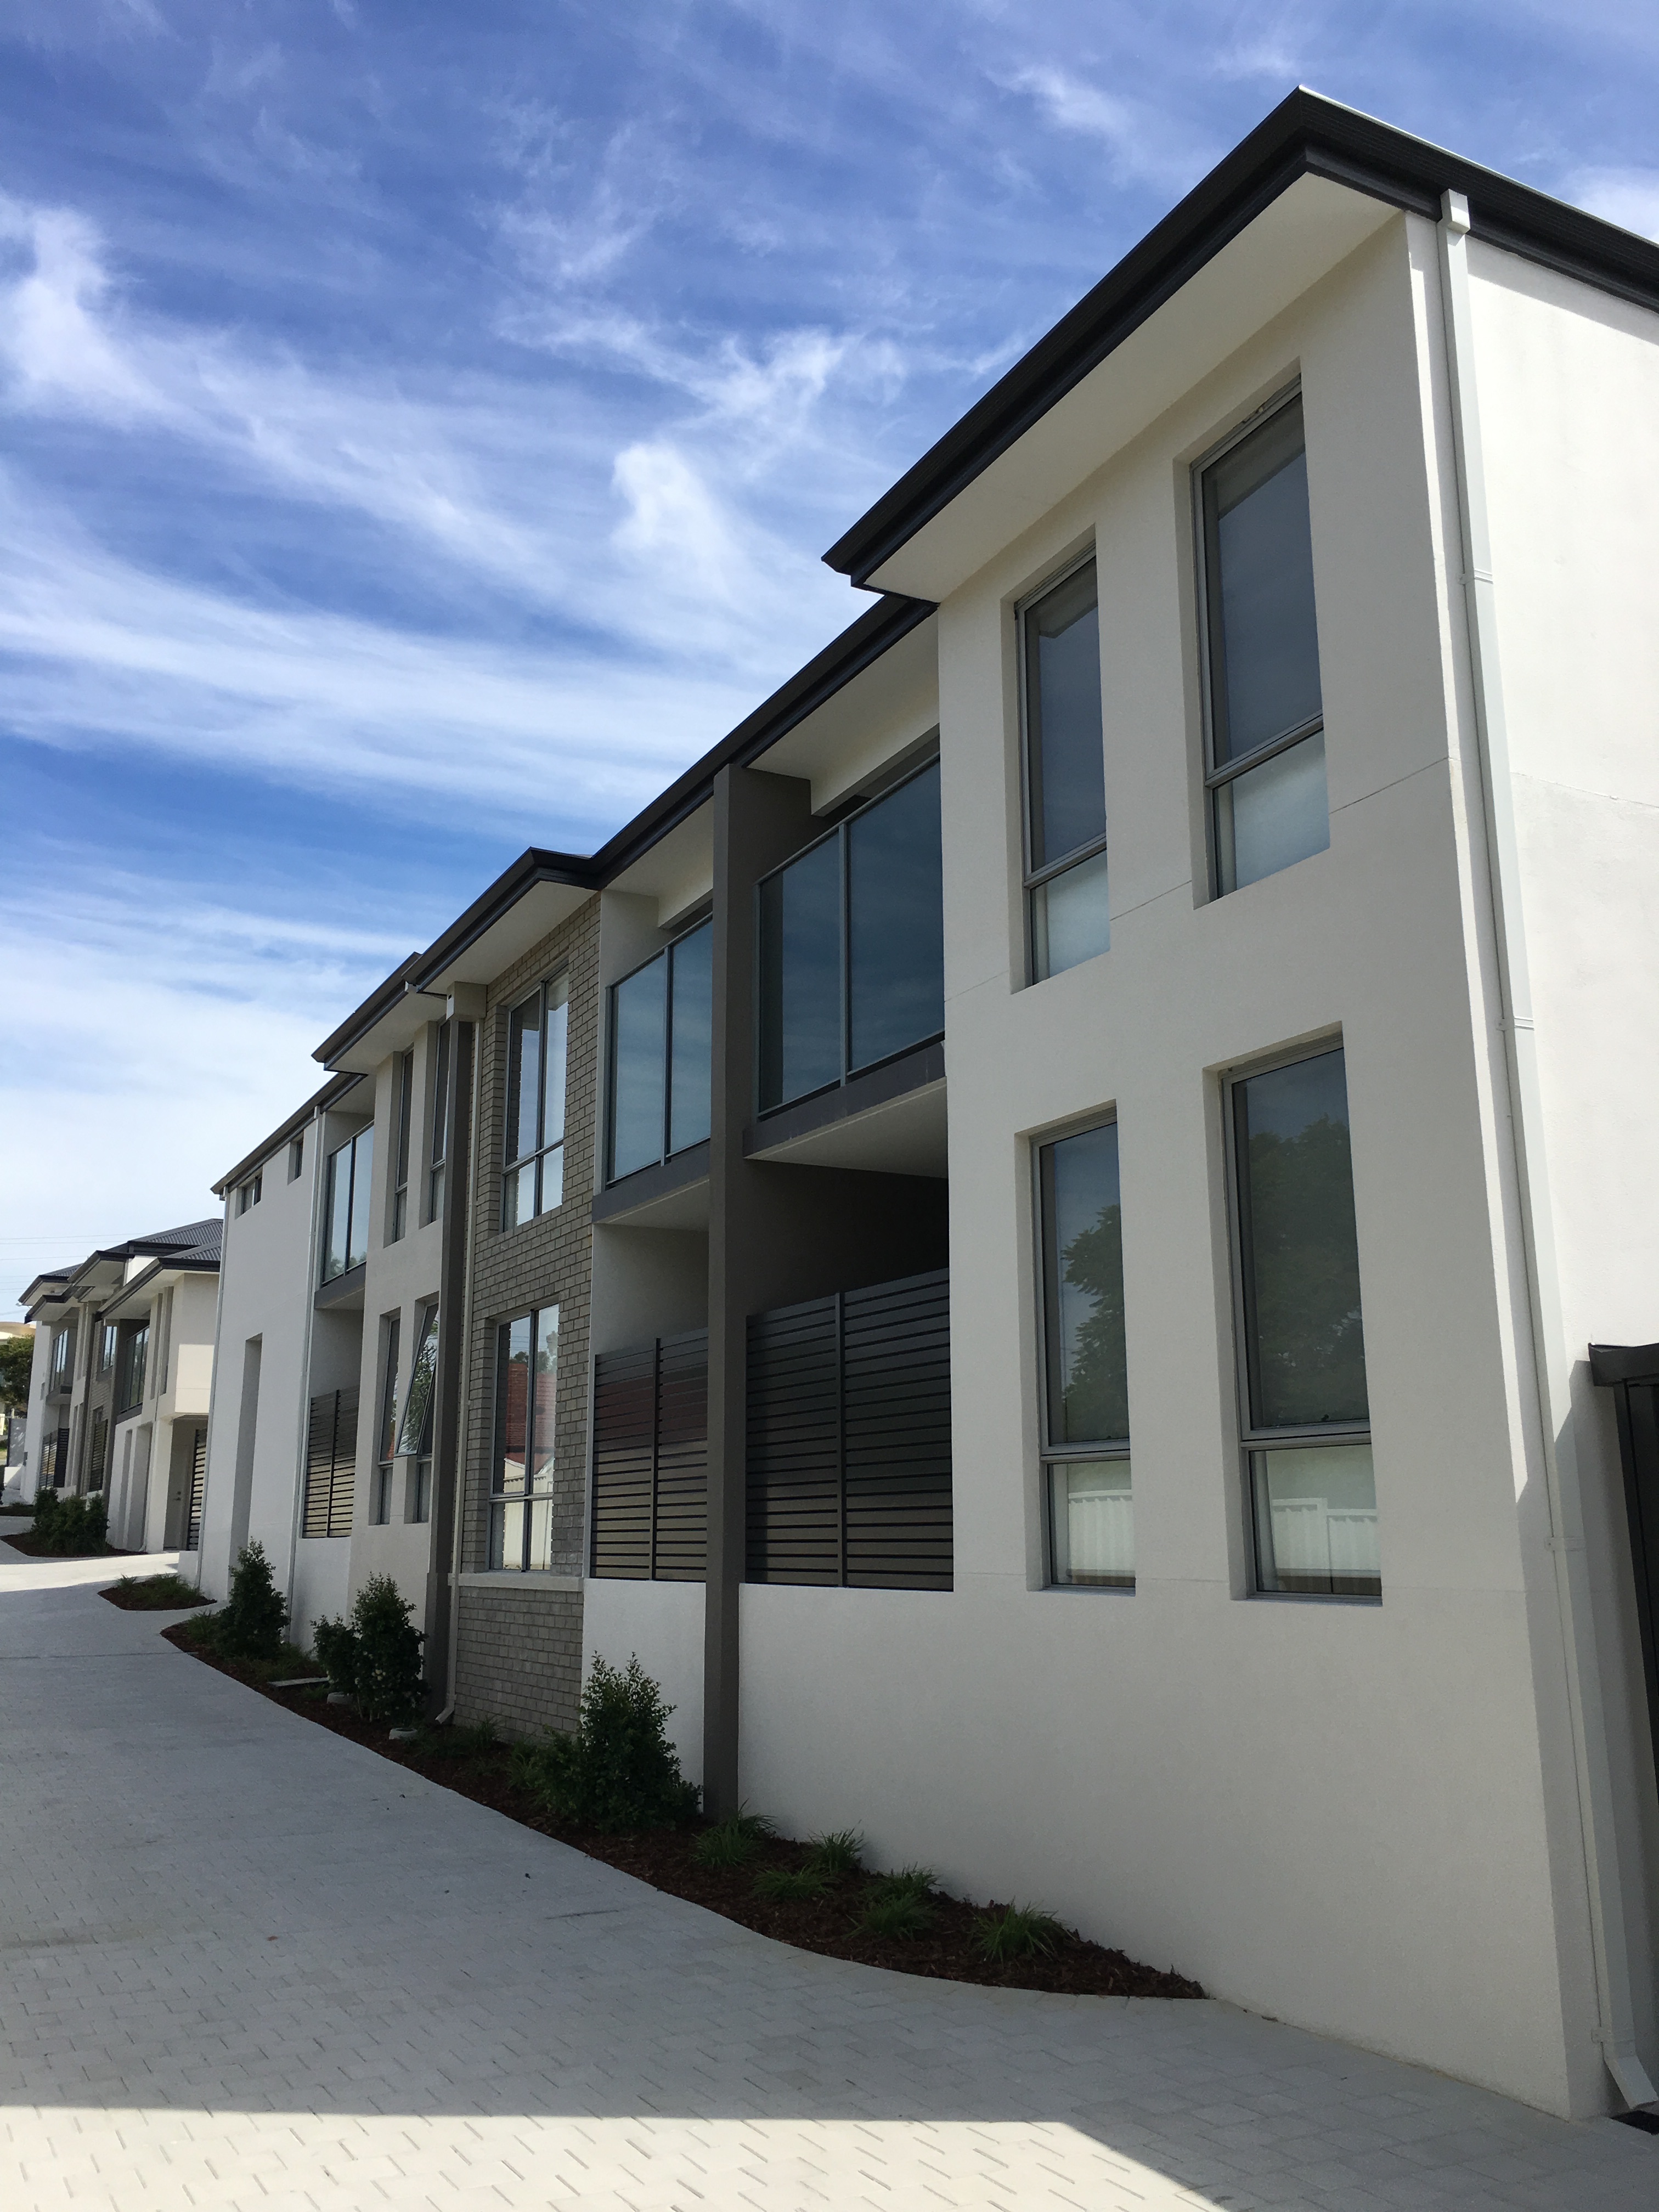 Exterior shot of large multi-unit complex painted in light grey and finished with dark grey and brick accents